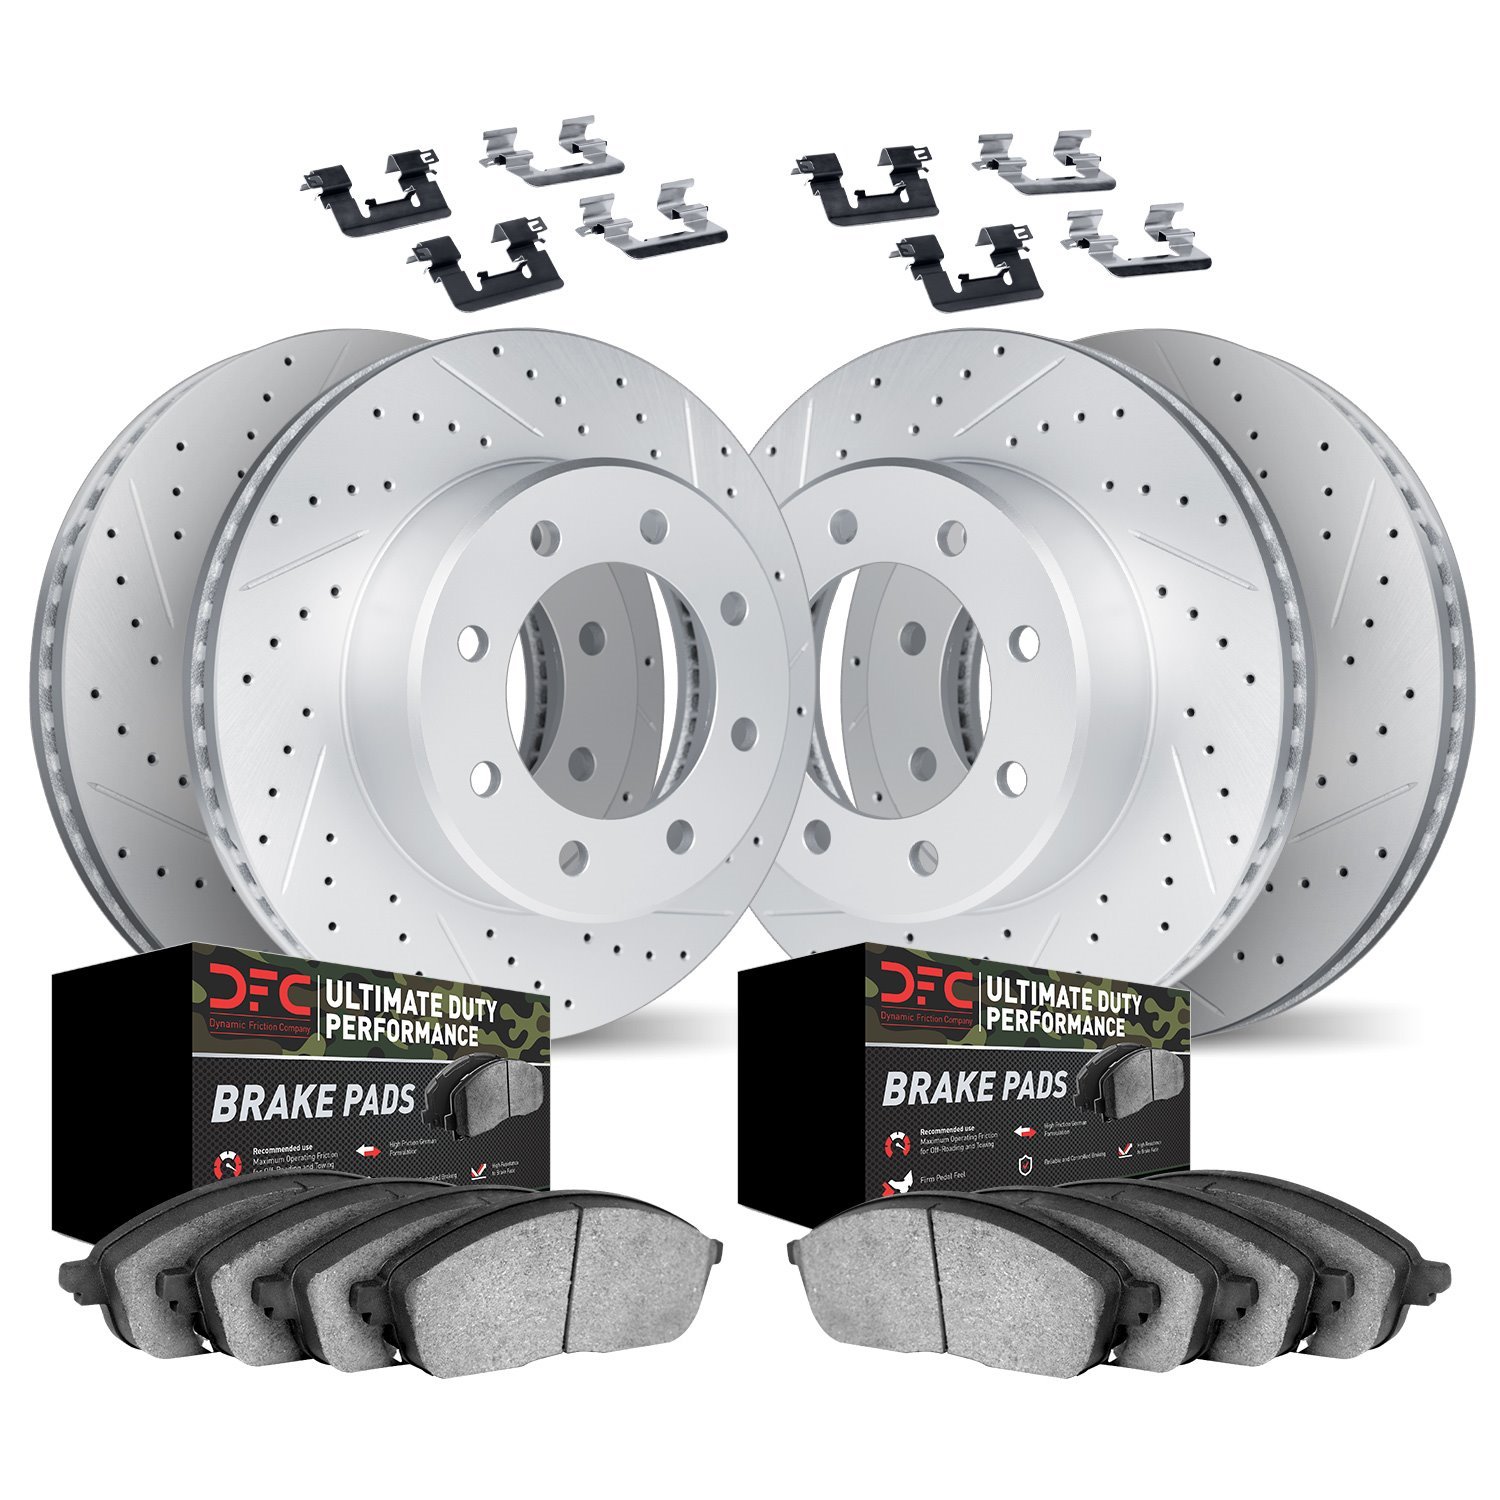 2414-54040 Geoperformance Drilled/Slotted Brake Rotors with Ultimate-Duty Brake Pads Kit & Hardware, 2006-2010 Ford/Lincoln/Merc